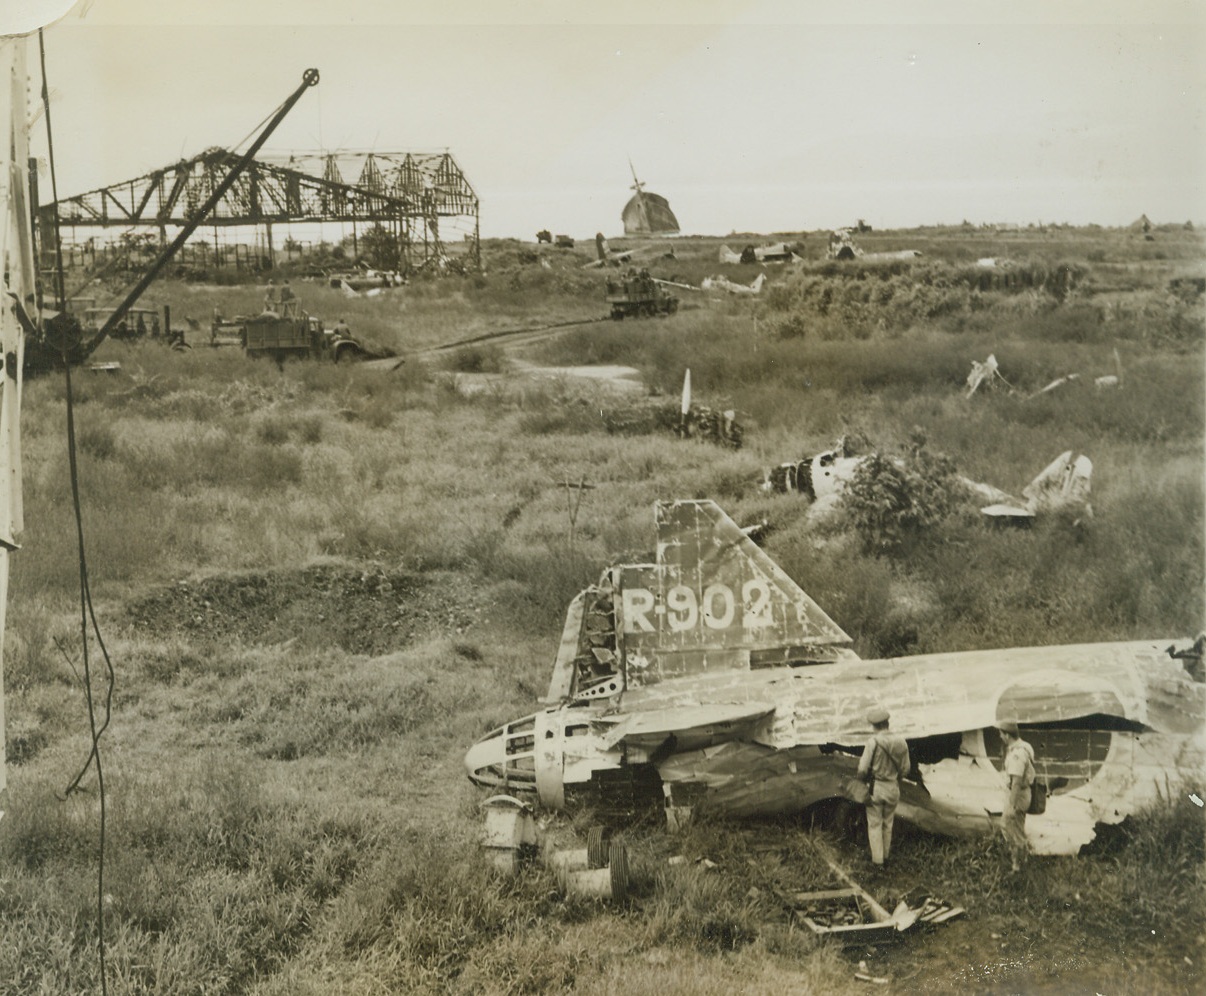 Littered Airfield, 9/30/1943. Lae, New Guinea – Wrecked Japanese Warbirds and debris from a bomb-ruined hangar litter the captured airfield at Lae. In the background, a half-sunk enemy ship tilts at an angle. Latest reports from New Guinea indicate that Australian forces have advanced deeper into Jap defenses around Finschhafen, while Allied fliers continue to pound the air base at Wewak 9/30/43 Credit Line (Photo By Frank Prist, Jr., ACME Photographer For War Pool);